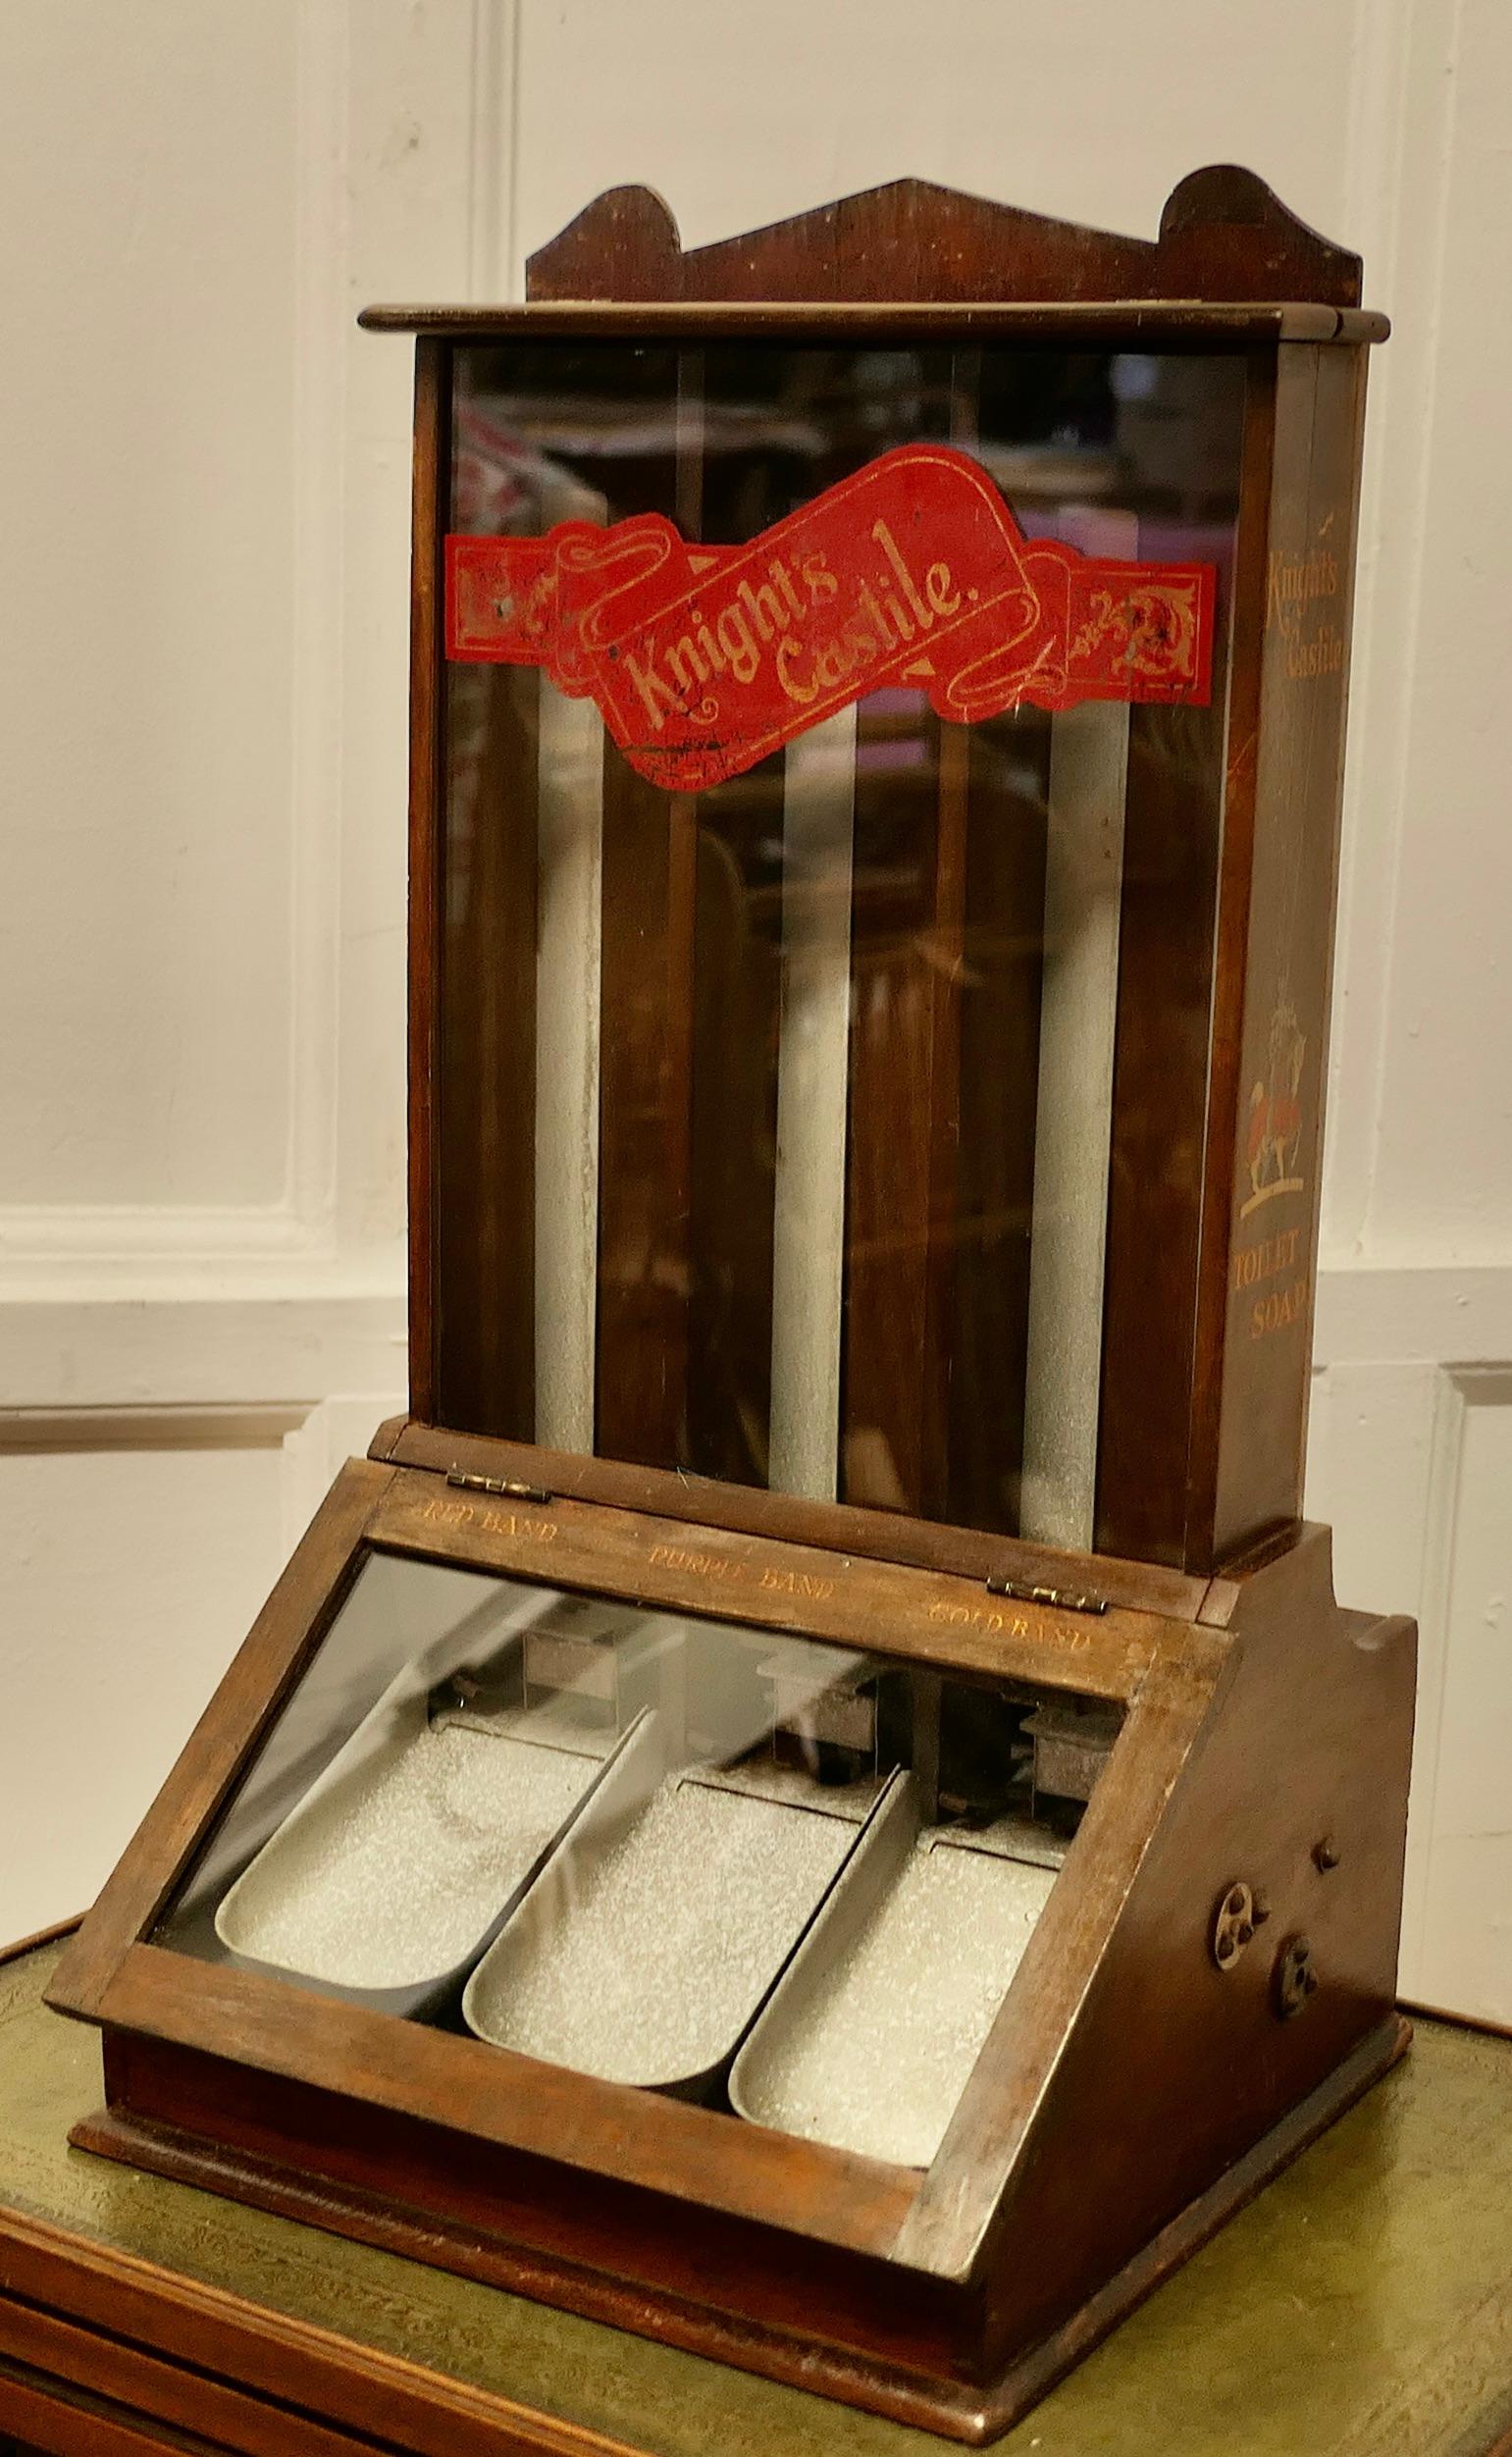 Knight’s Castile Chemist Shop Display Soap Dispensing Cabinet

This is a very rare piece, the upper glazed section holds 3 different soaps (Red Band, Purple Band and Gold Band) which each drop down to a hinged dispenser at the bottom
The cabinet is